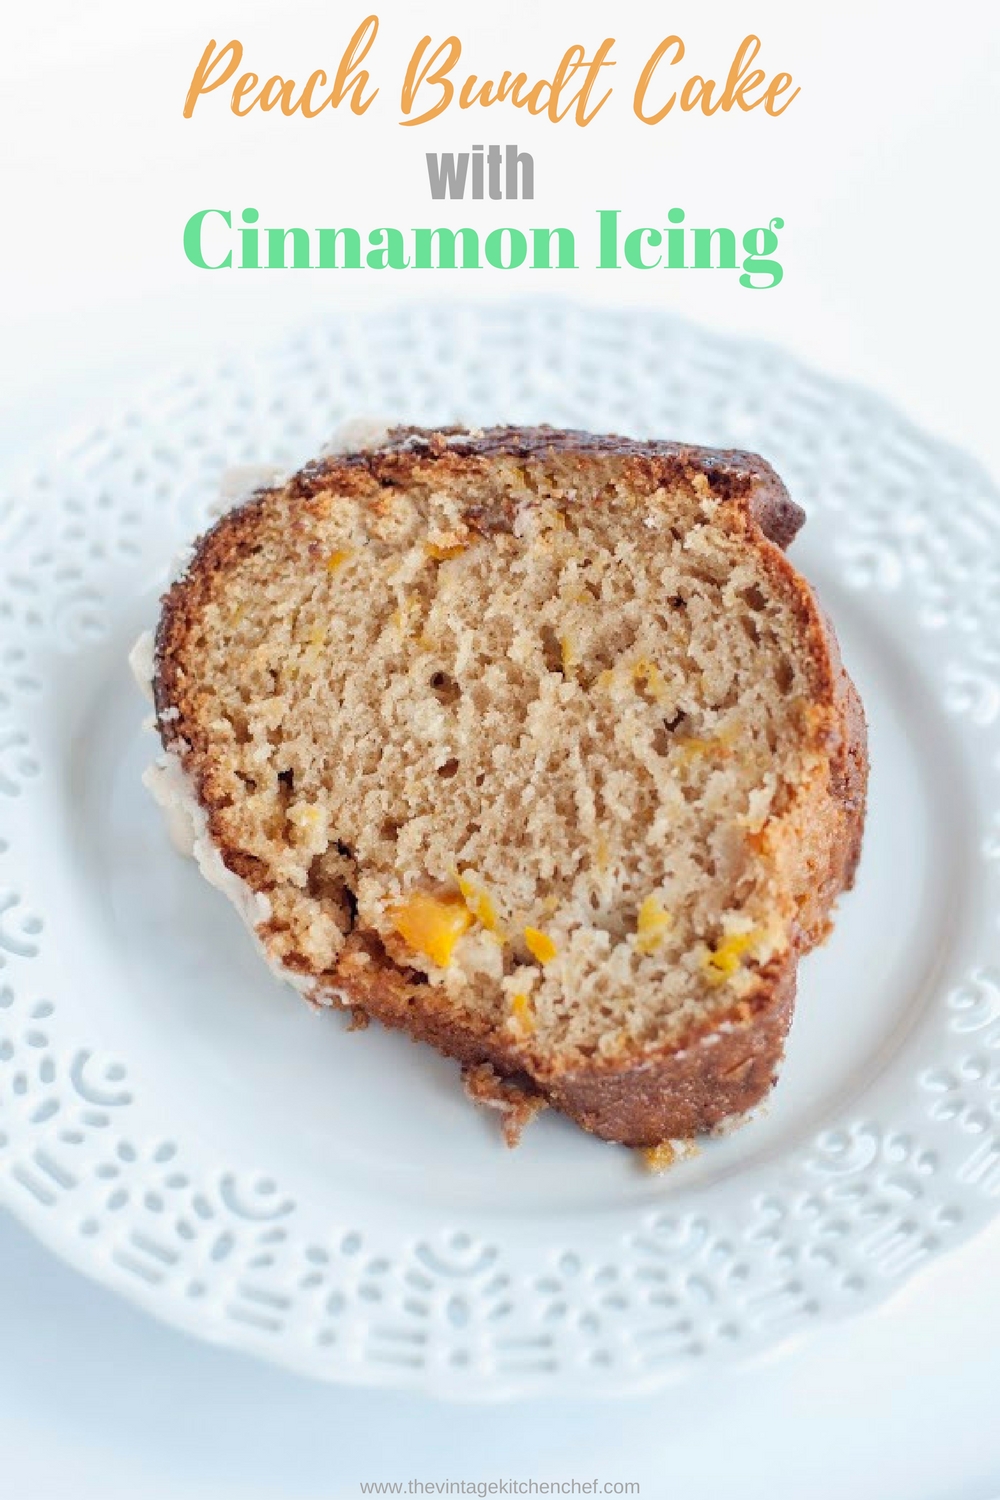 Peach Bundt Cake with Cinnamon Icing is a dense and moist cake It's as easy as one, two, three...mix, bake, and ice! Oh, and step four...eat! 